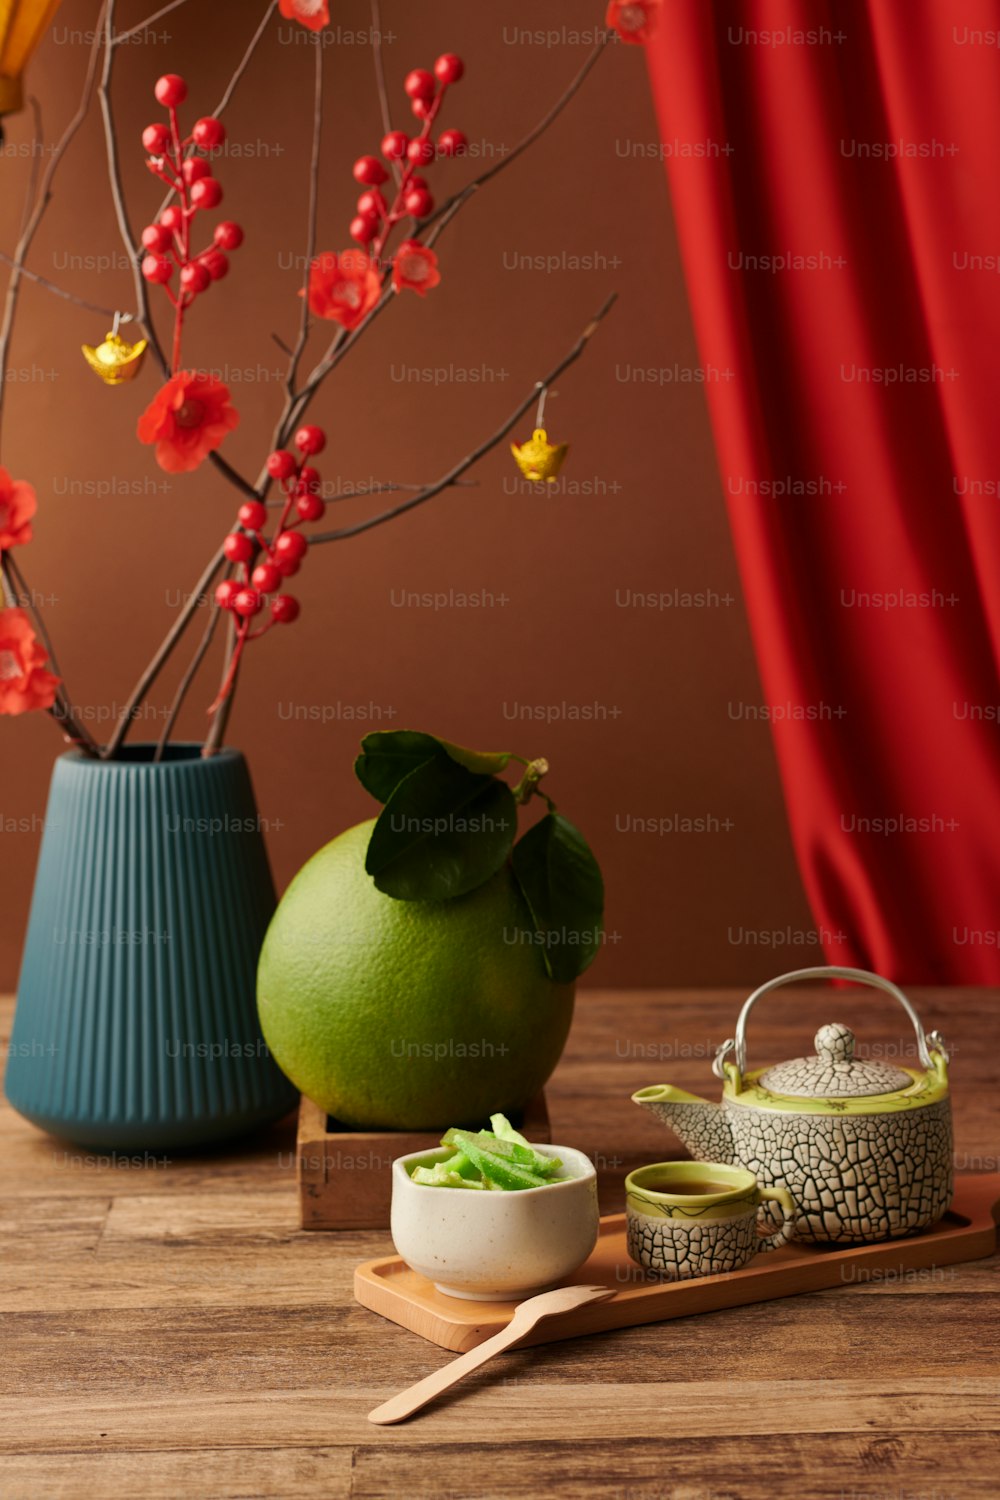 Big pomelo fruit, teapot, cup and candied fruits for Spring festival on wooden table